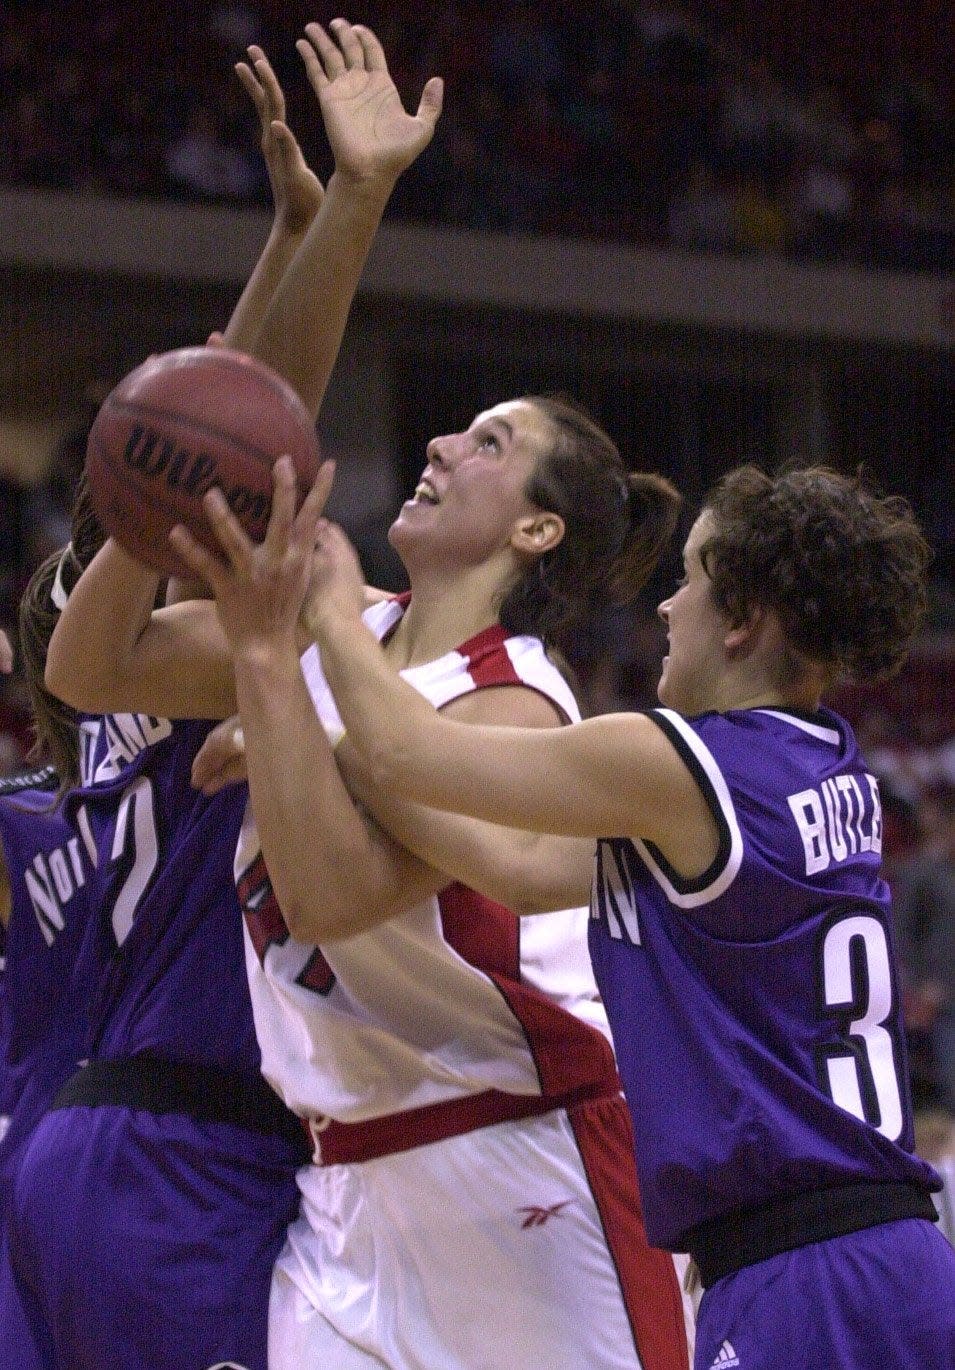 Wisconsin's Jessie Stomski (center) scored 29 points in an NCAA Tournament loss.